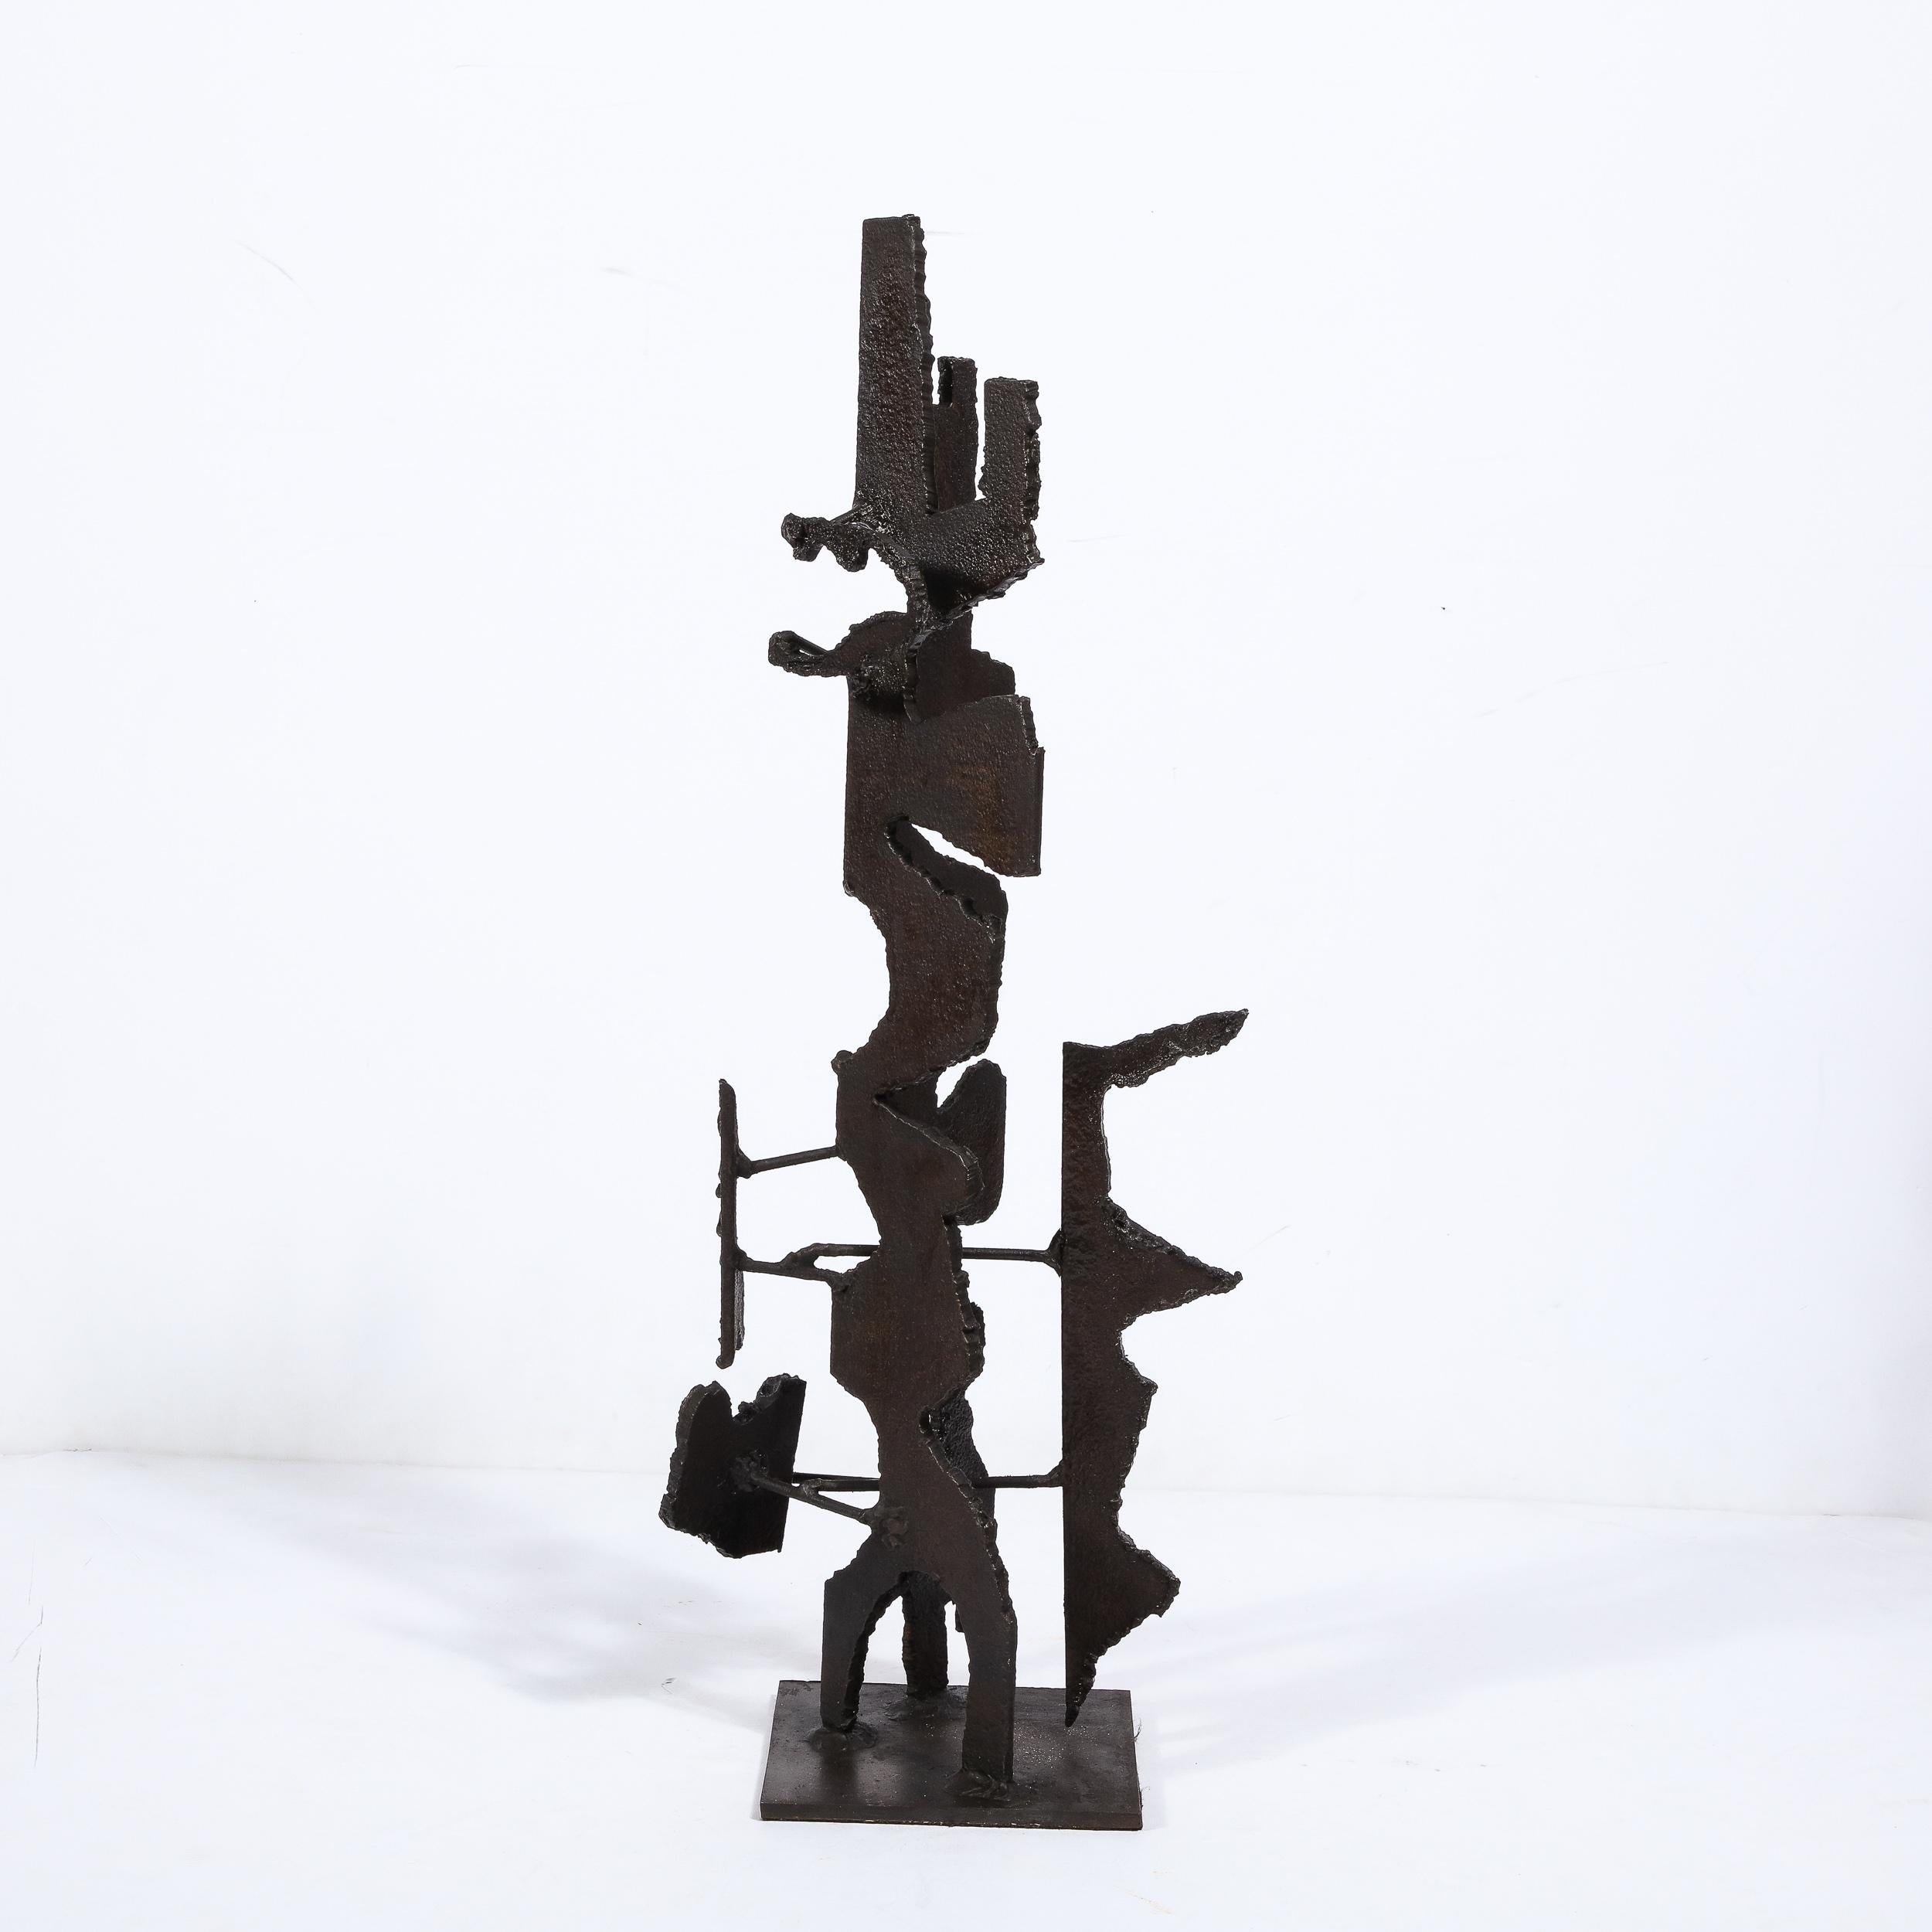 Brutalist Steel Sculpture in Oil and Waxed Finish by Jan Van Deckter For Sale 2